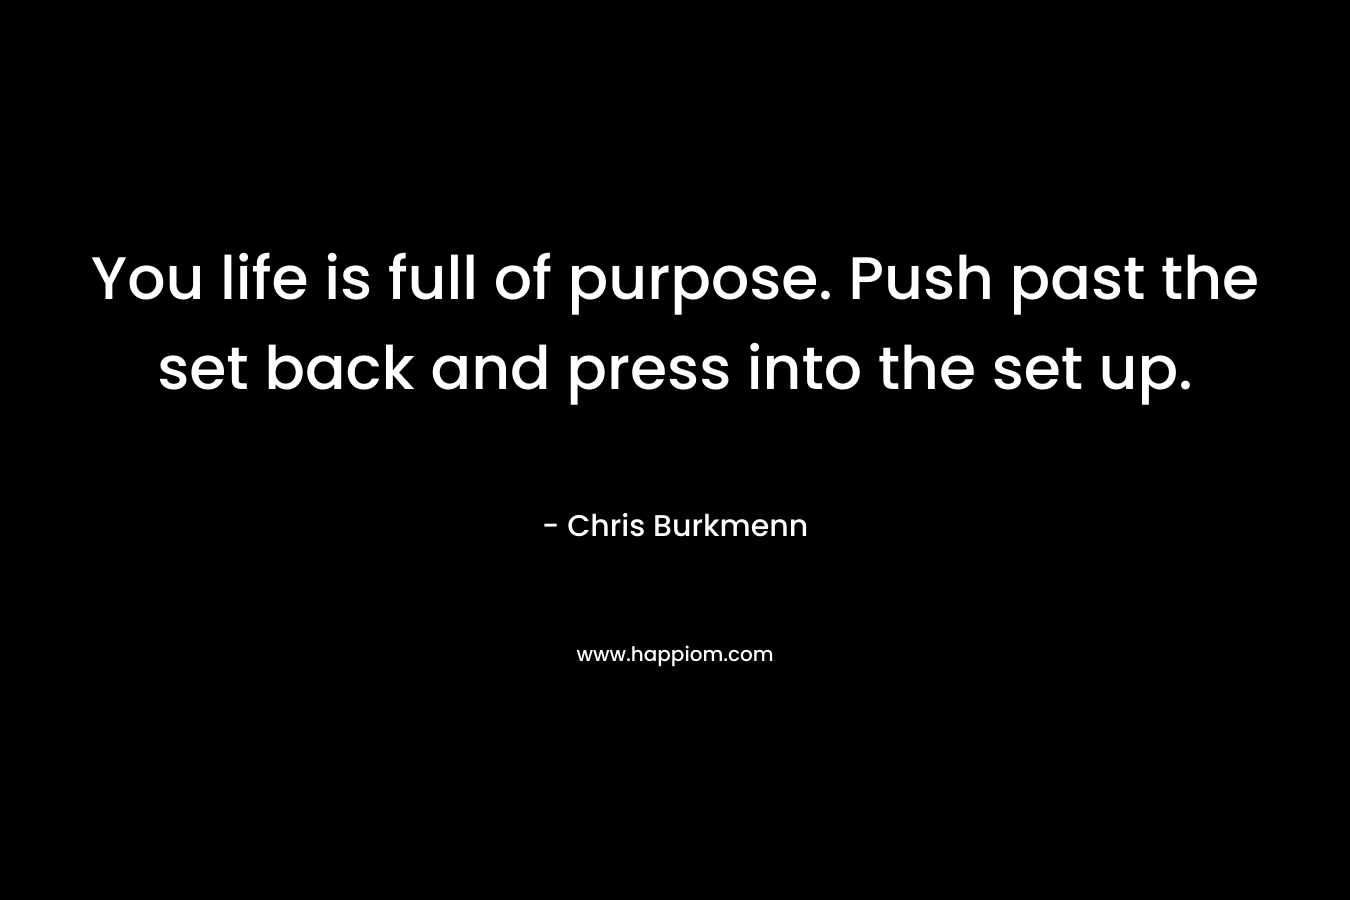 You life is full of purpose. Push past the set back and press into the set up.